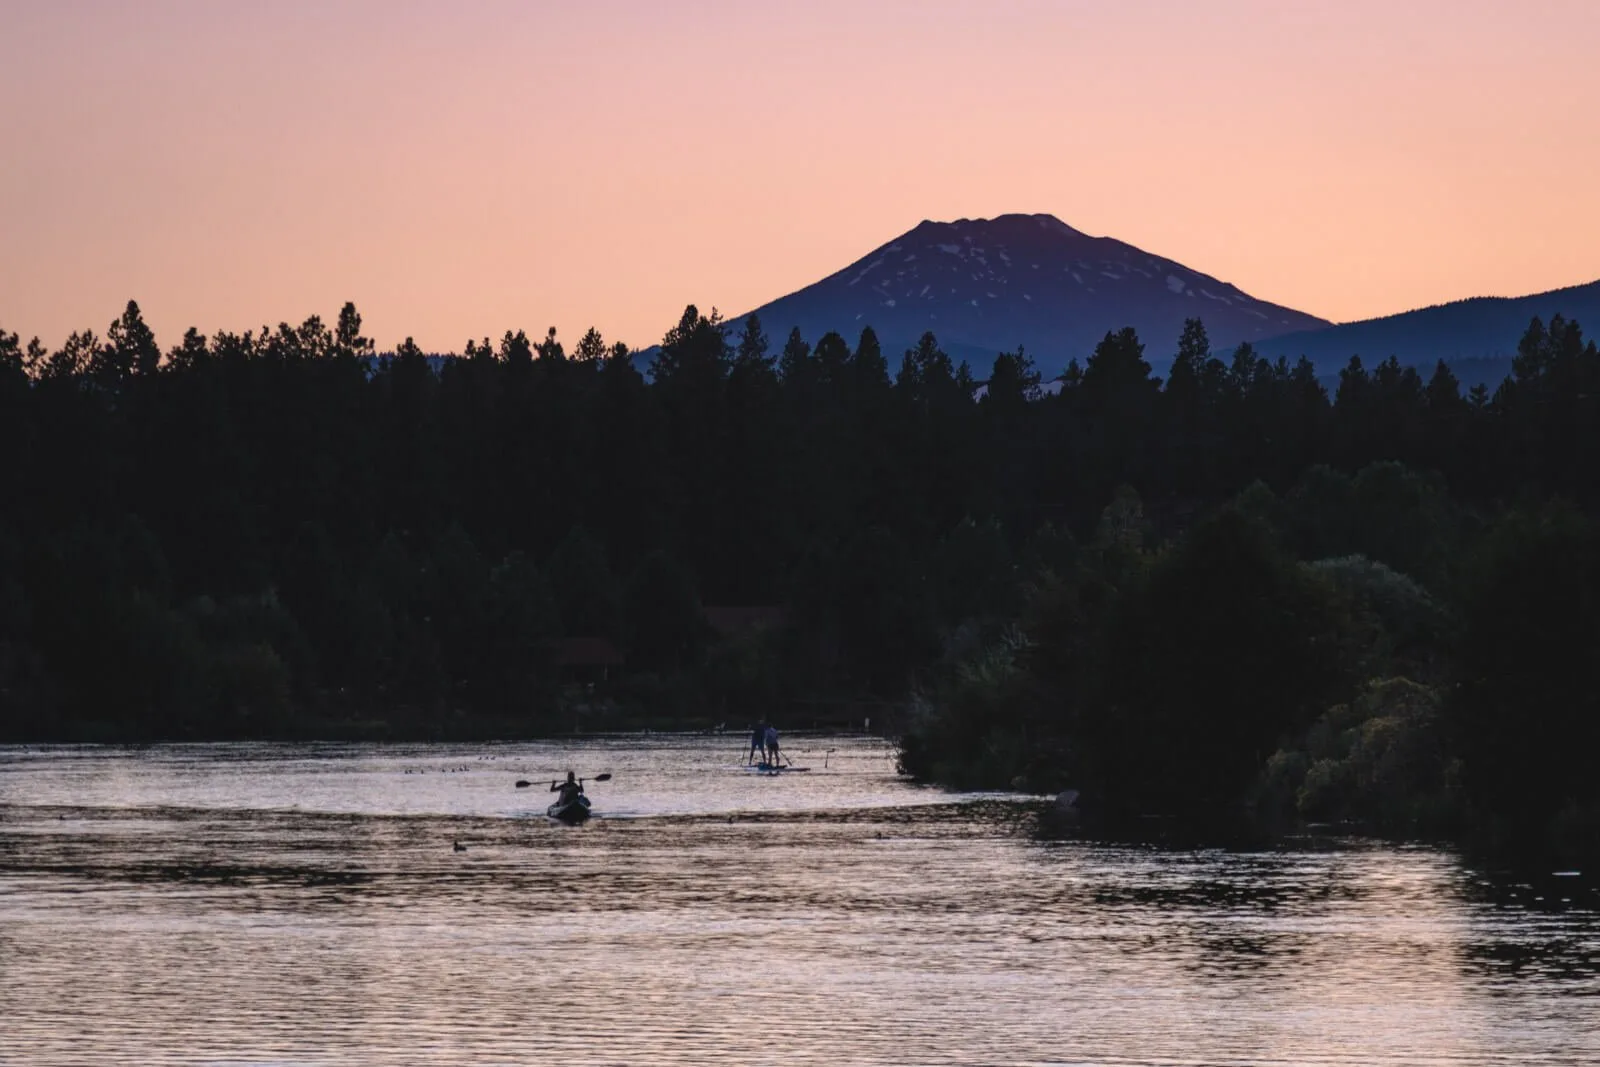 Kayakers on the Deschutes River — add this to your list if you’re wondering what to do in Bend